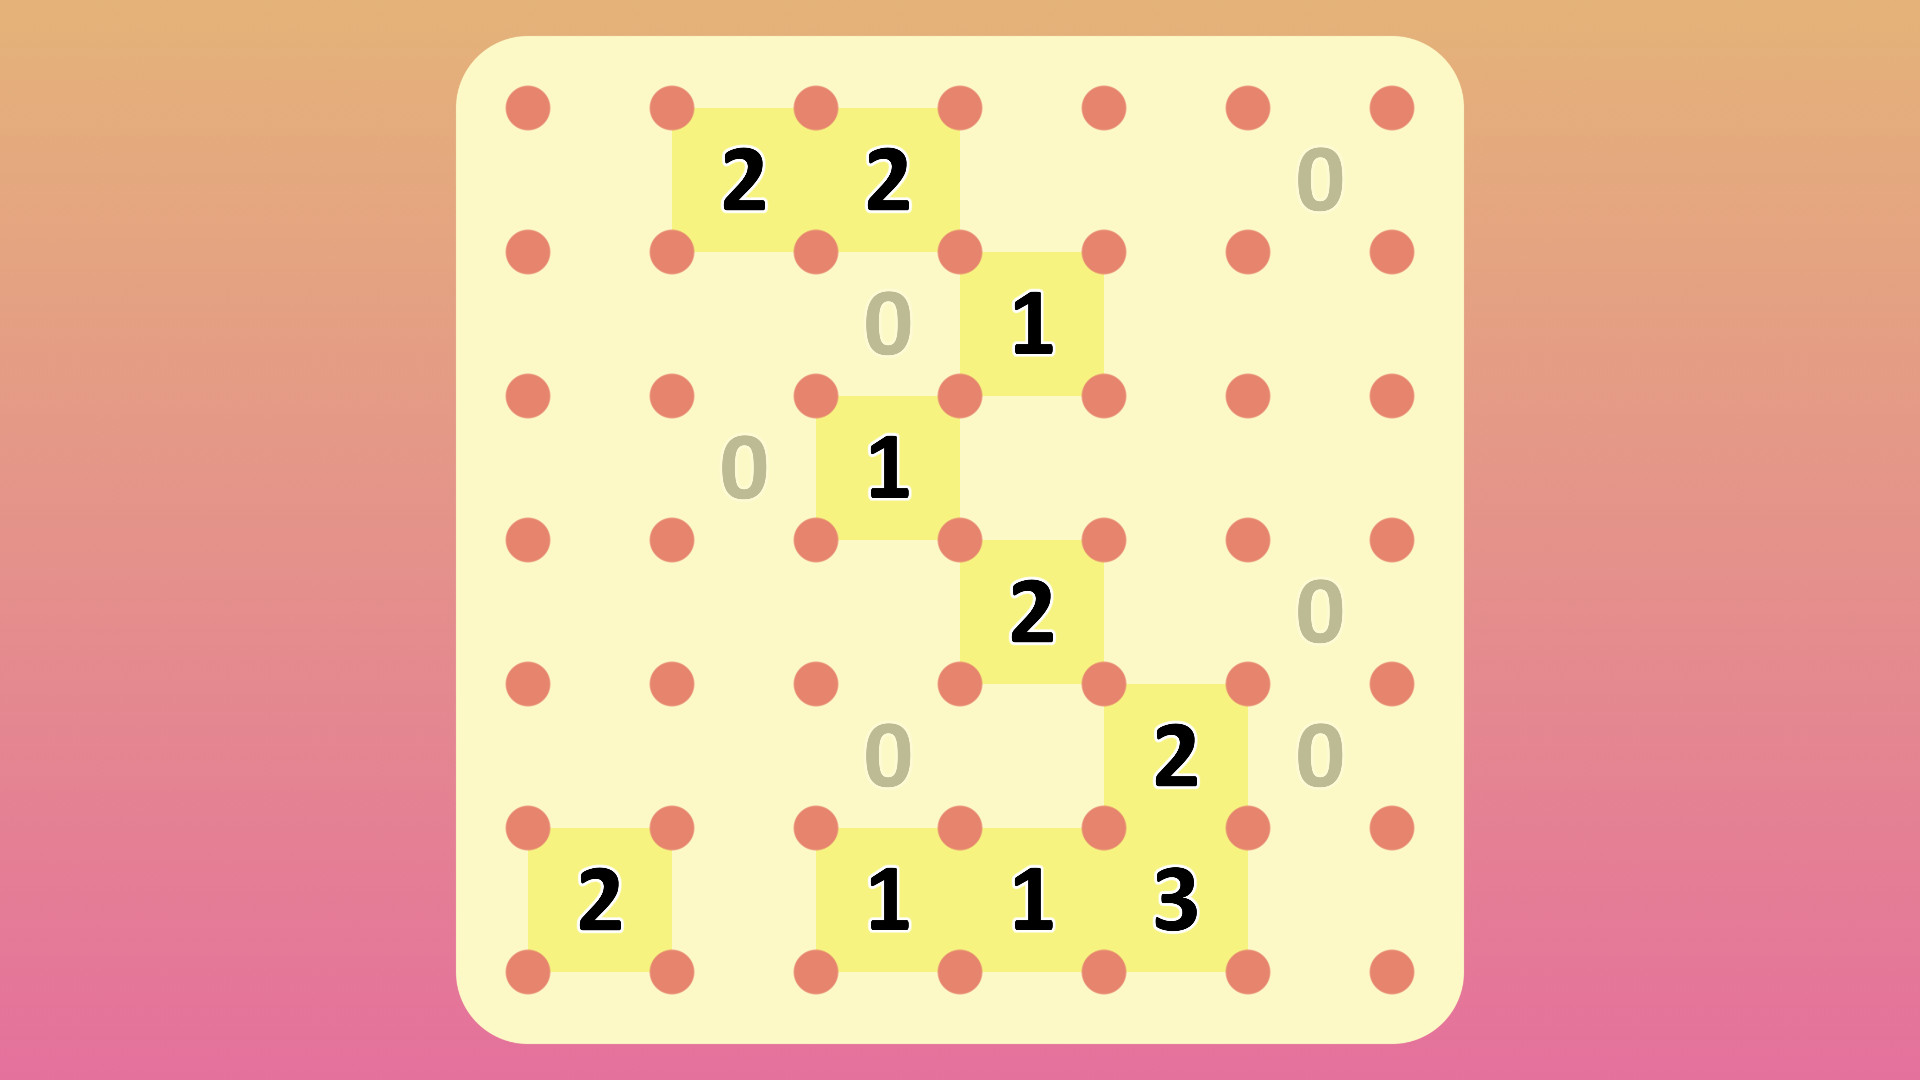 Line Loops - Logic Puzzles Free Download